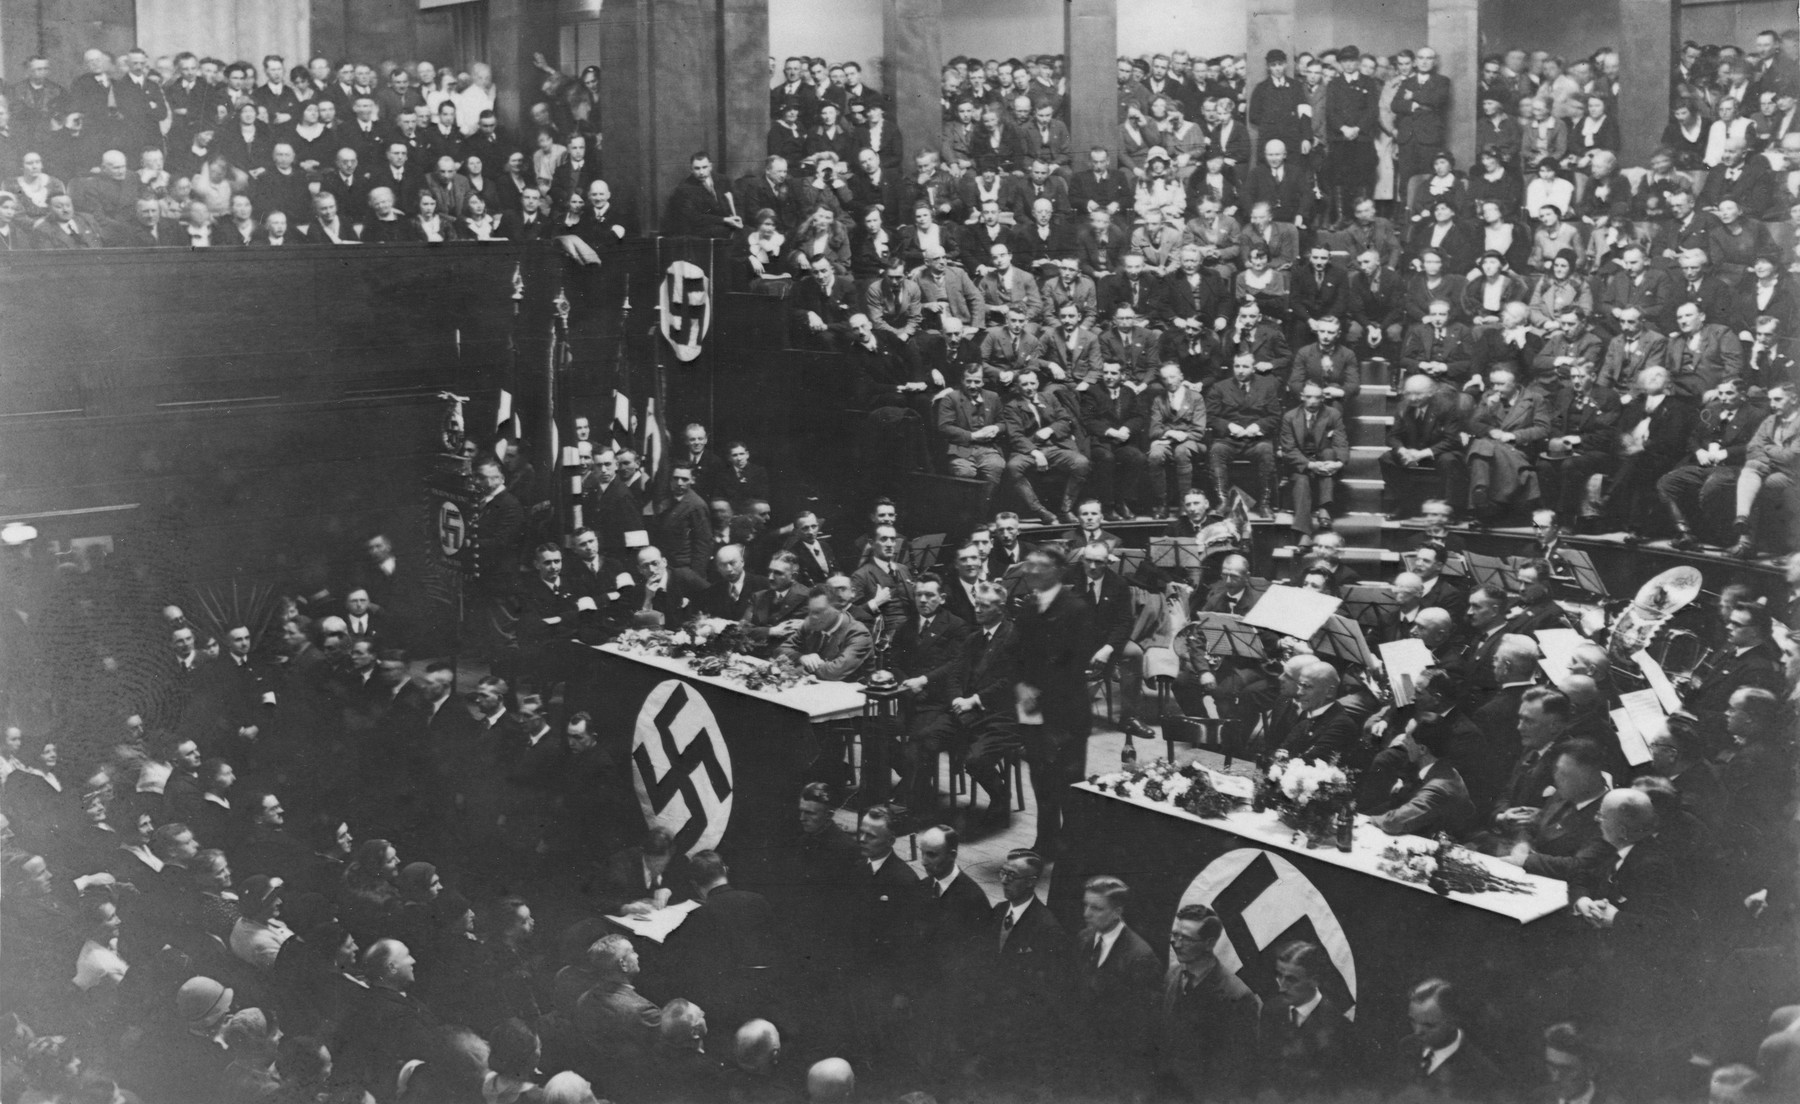 Nazi party leaders fill the Weimar Halle (the public hall in Weimar) after the 1932 presidential elections.